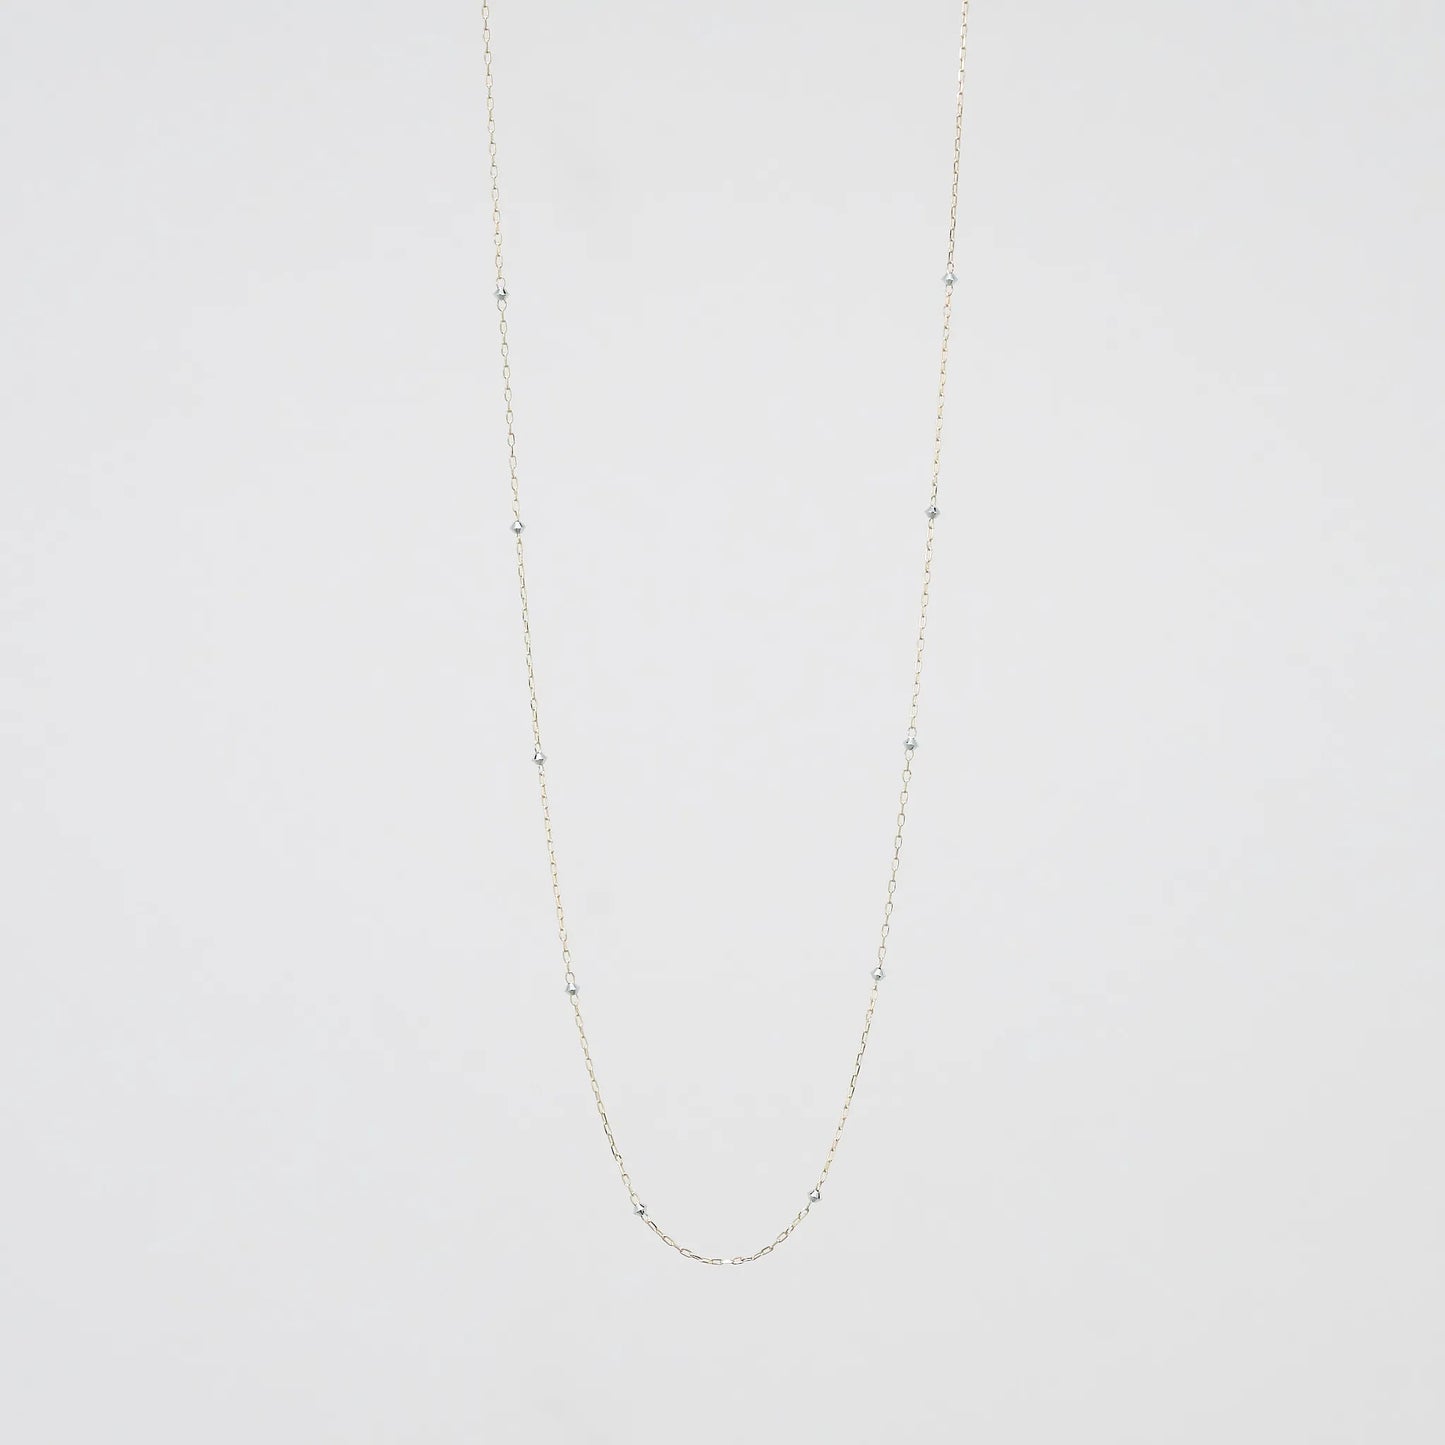 Gold Chain Necklace_silver colored parts(60cm)